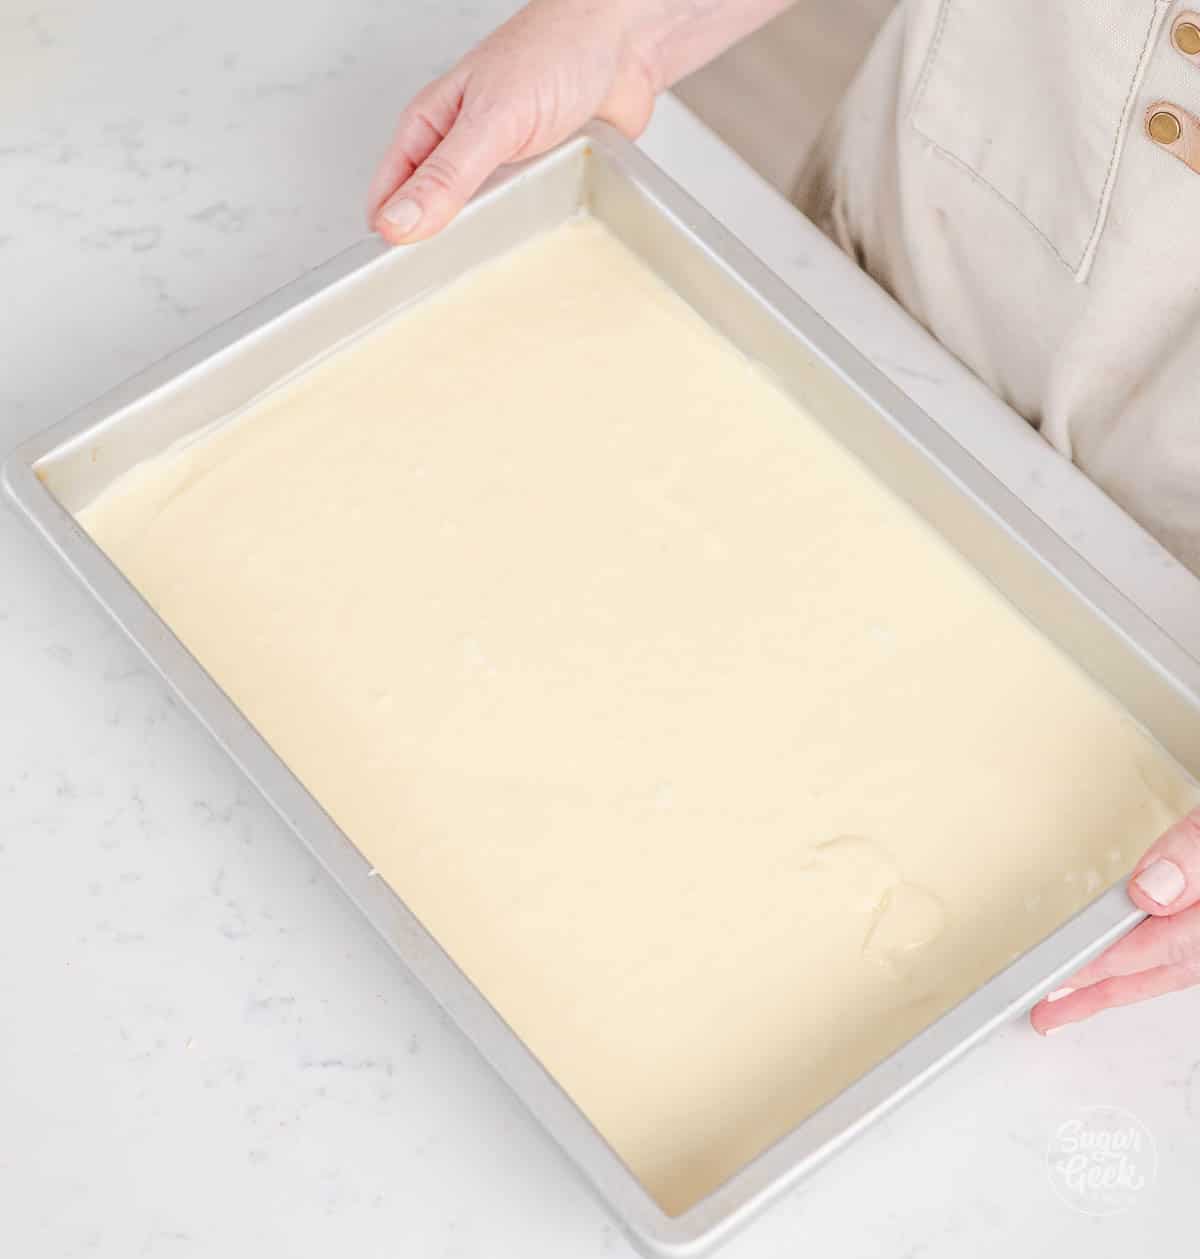 hands holding a pan full of spread out white cheesecake batter 